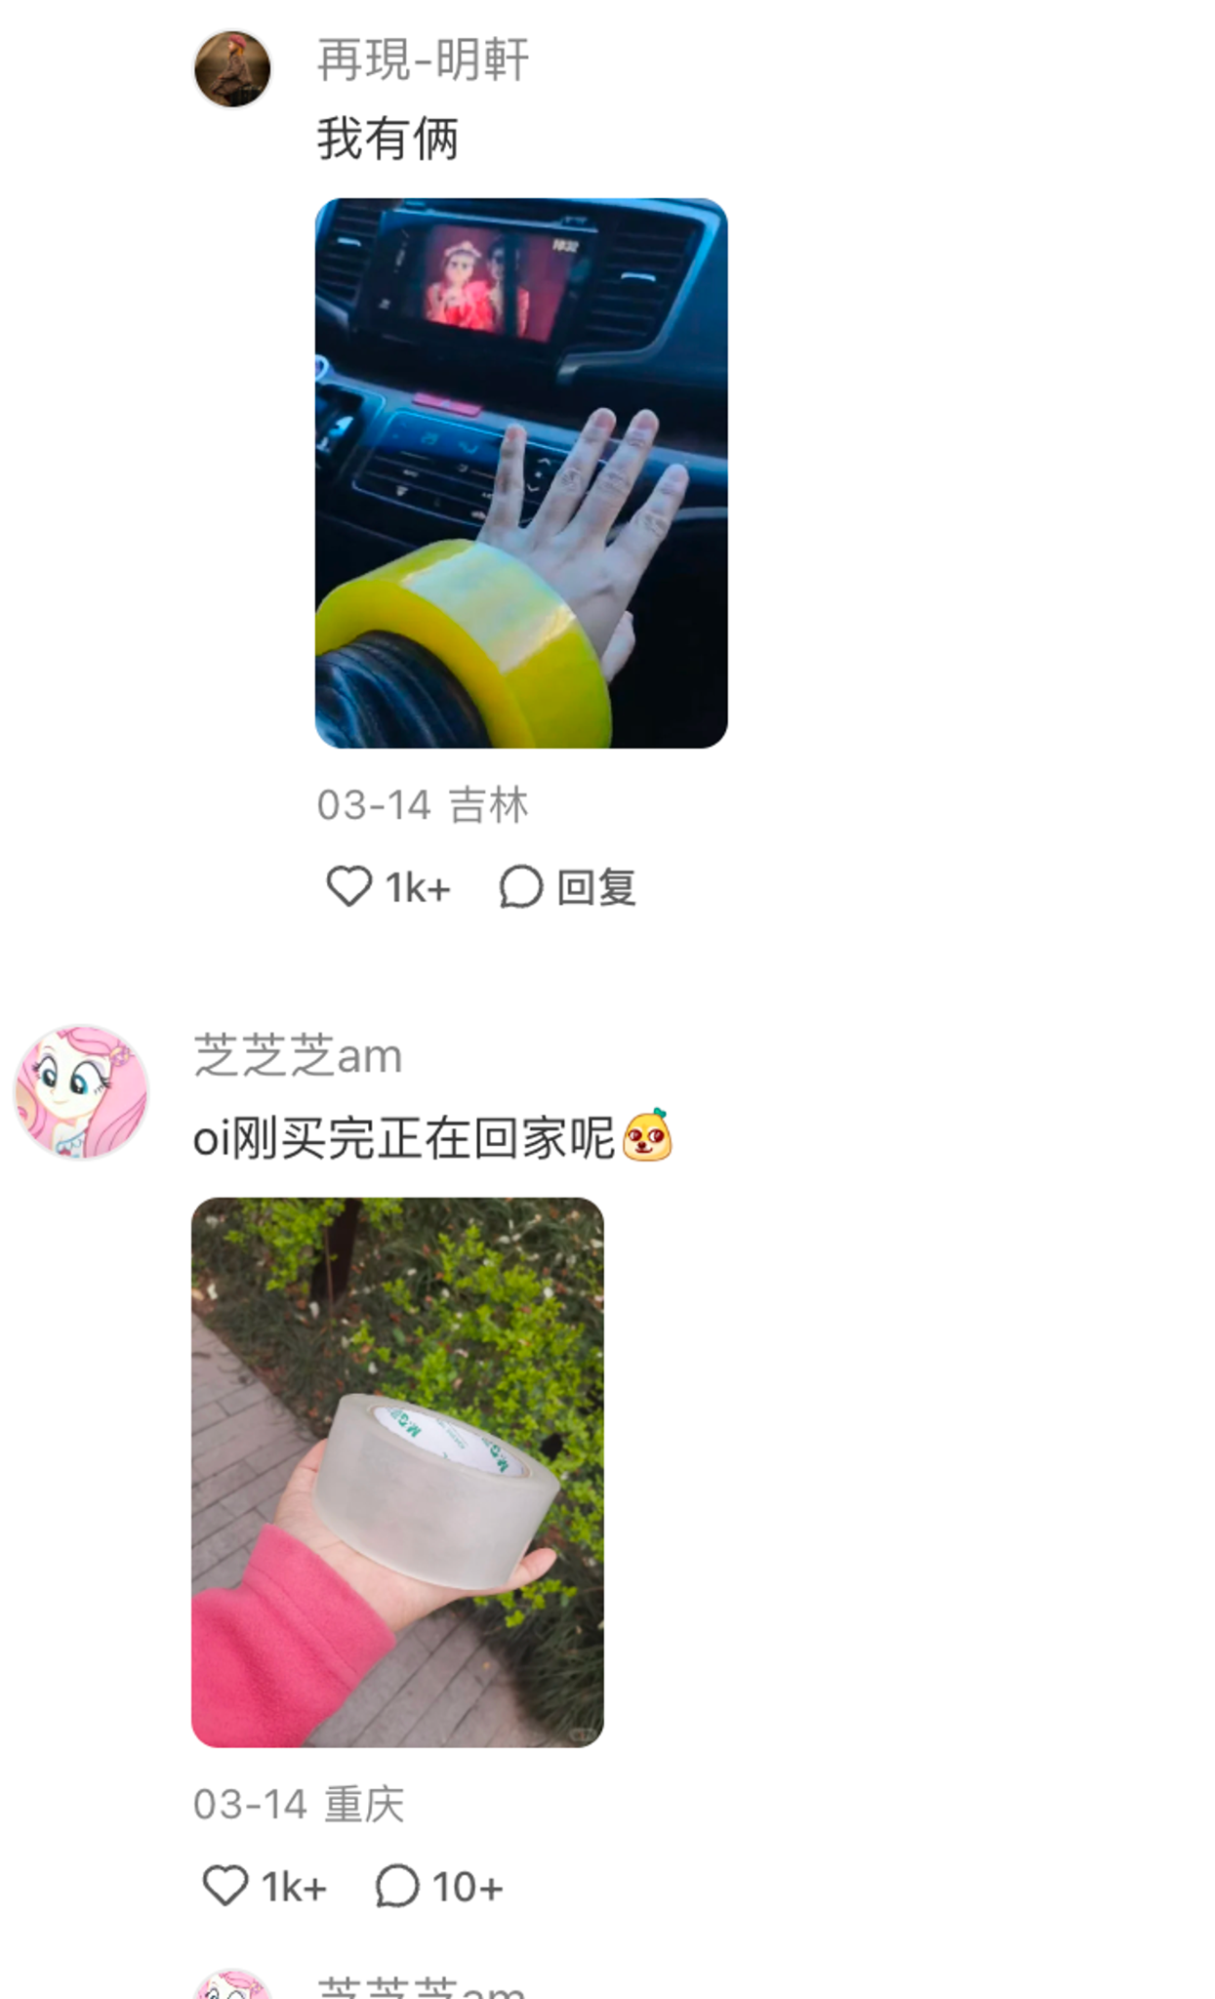 Social media in China lit up with images mocking Balenciaga's tape roll bangle. Photo: Douyin